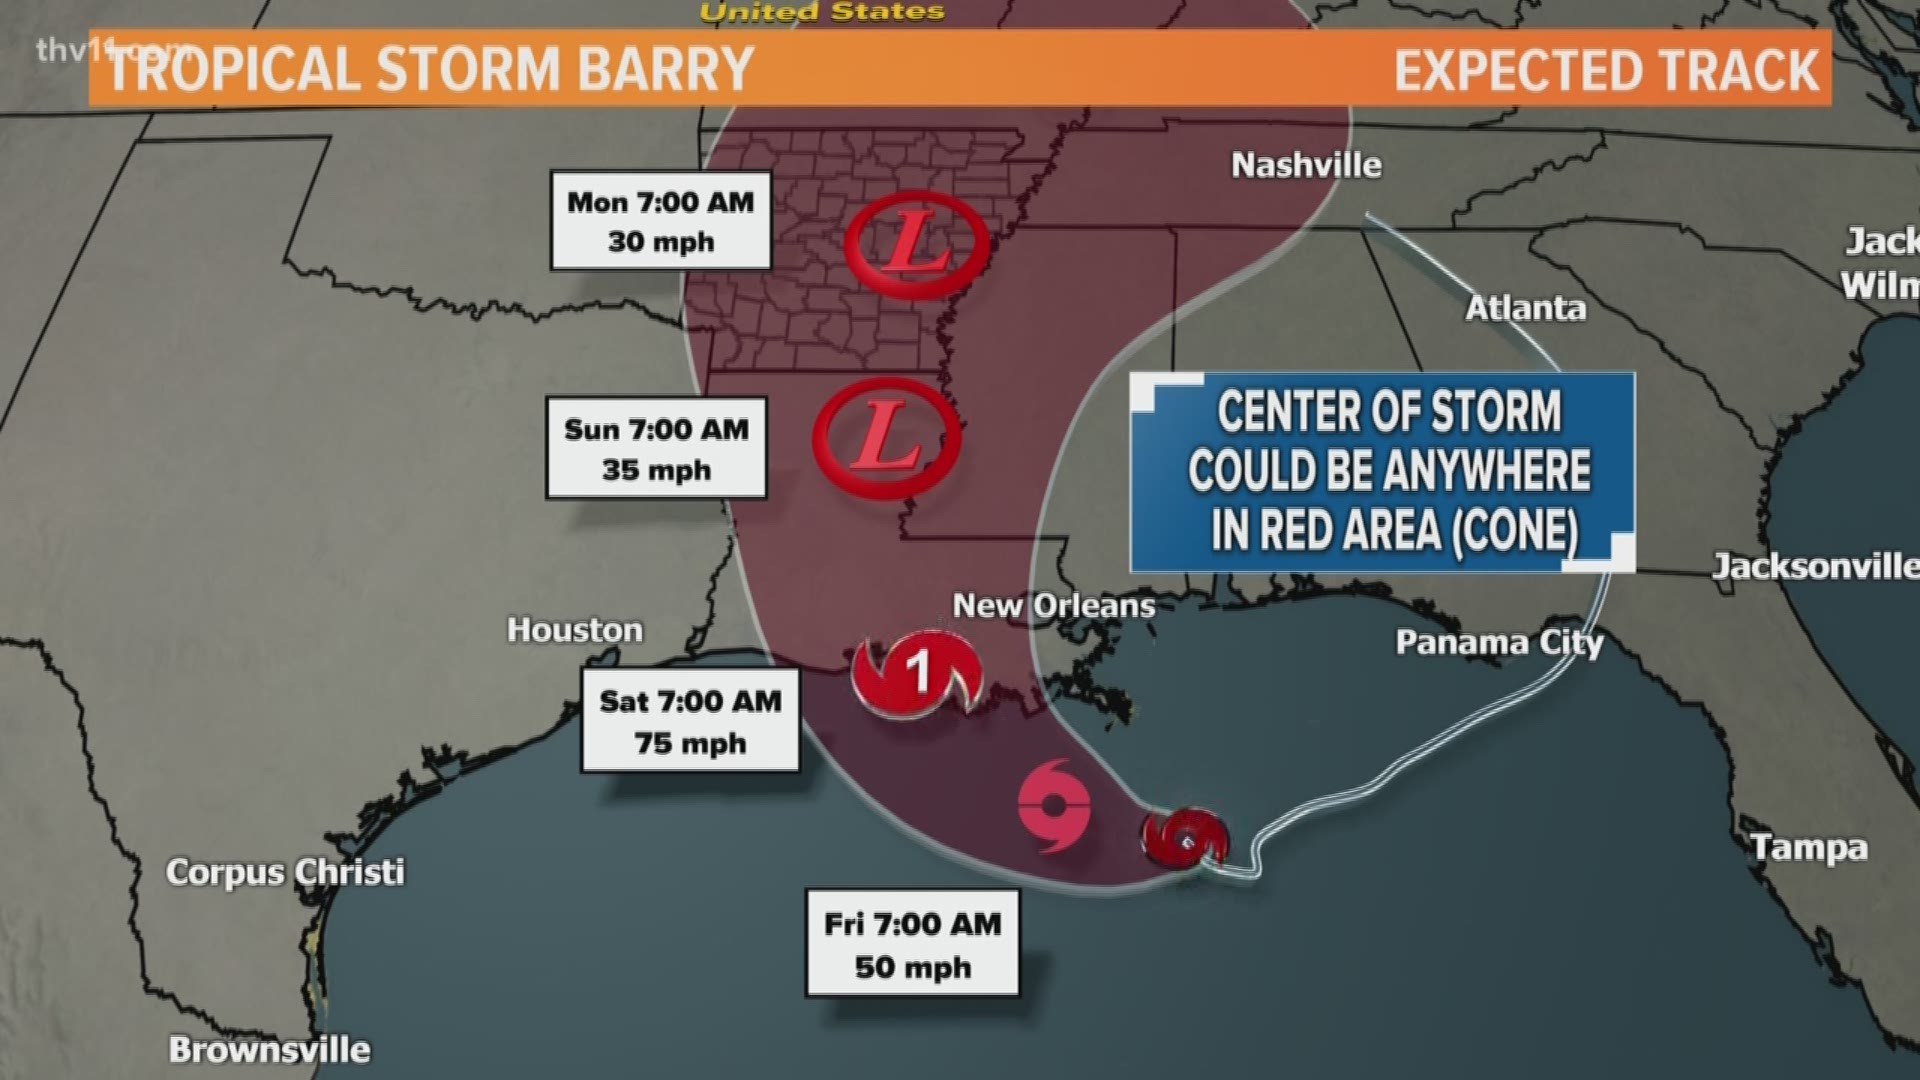 The National Hurricane Center just upgraded the system to Tropical Storm Barry, but it will likely strengthen to a Cat. 1 hurricane by the time it makes landfall.